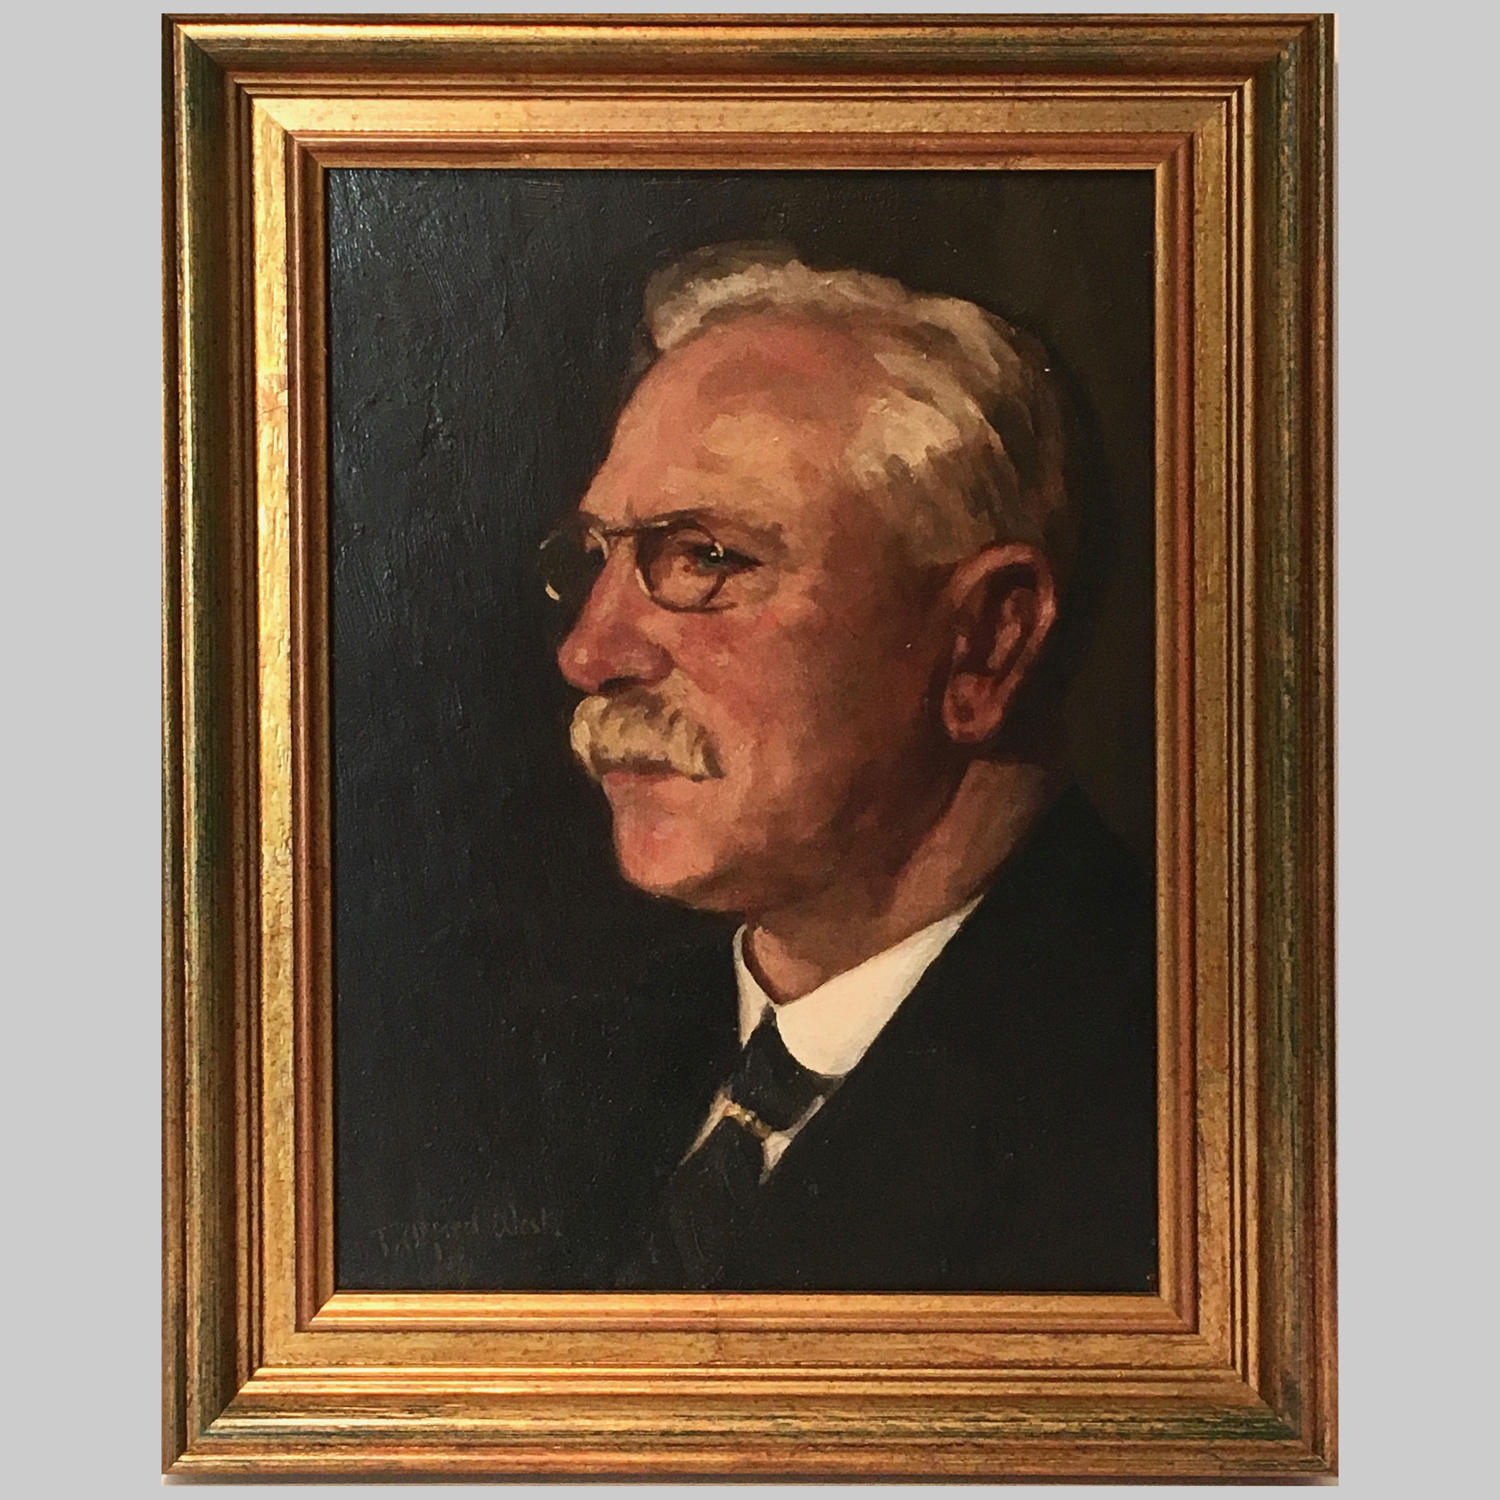 Studio portrait oil painting of Mr Pearce by T.Alfred West